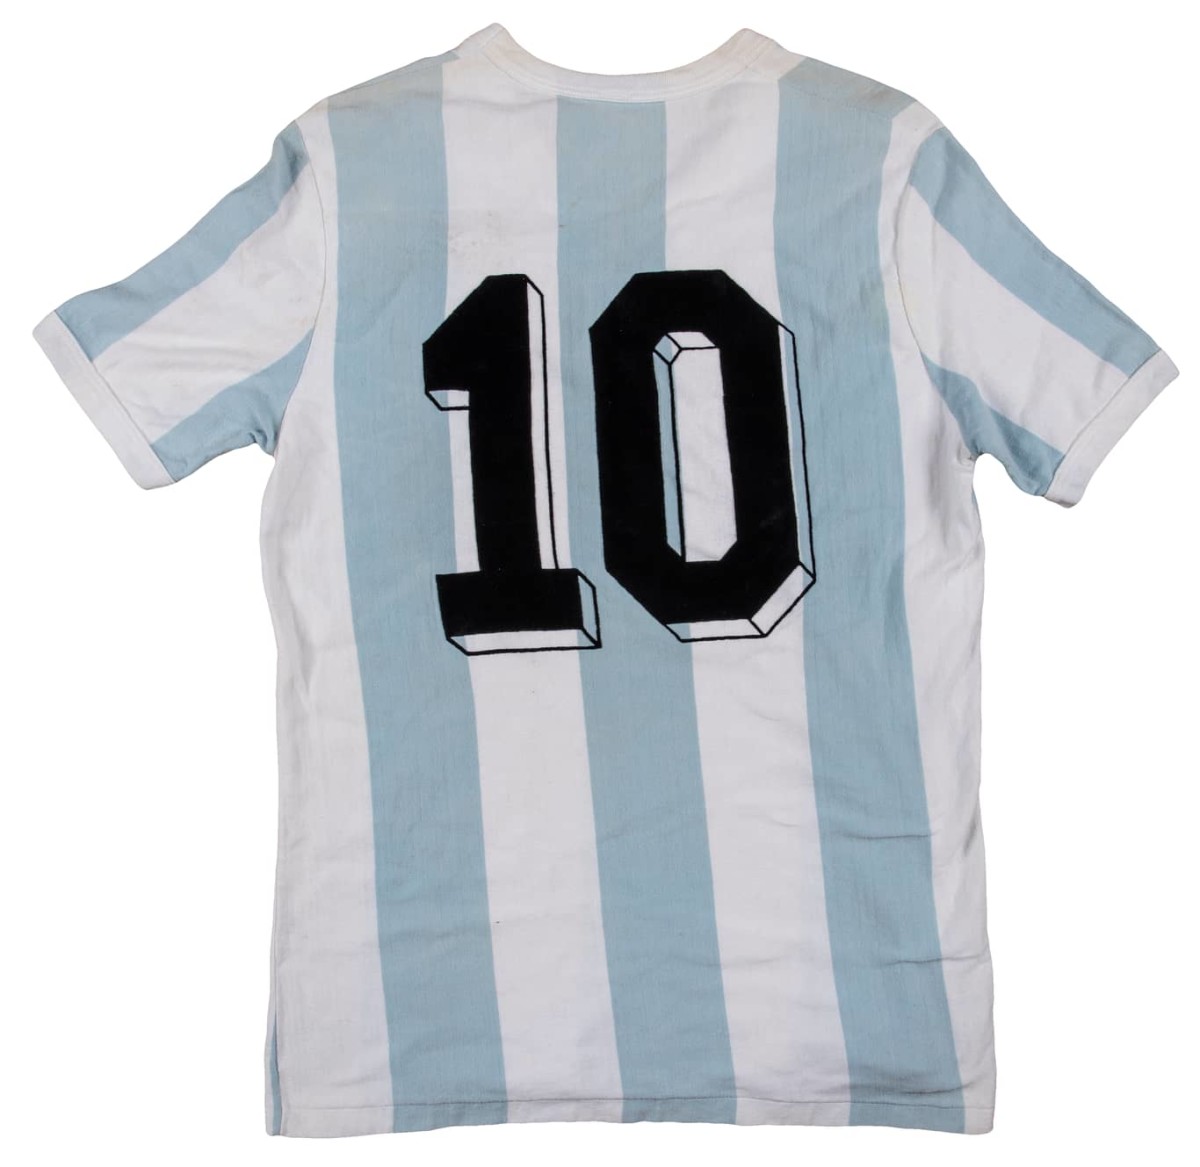 Diego Maradona game-used, photo-matched Argentina primary Jersey from 1982 FIFA World Cup vs. El Salvador.